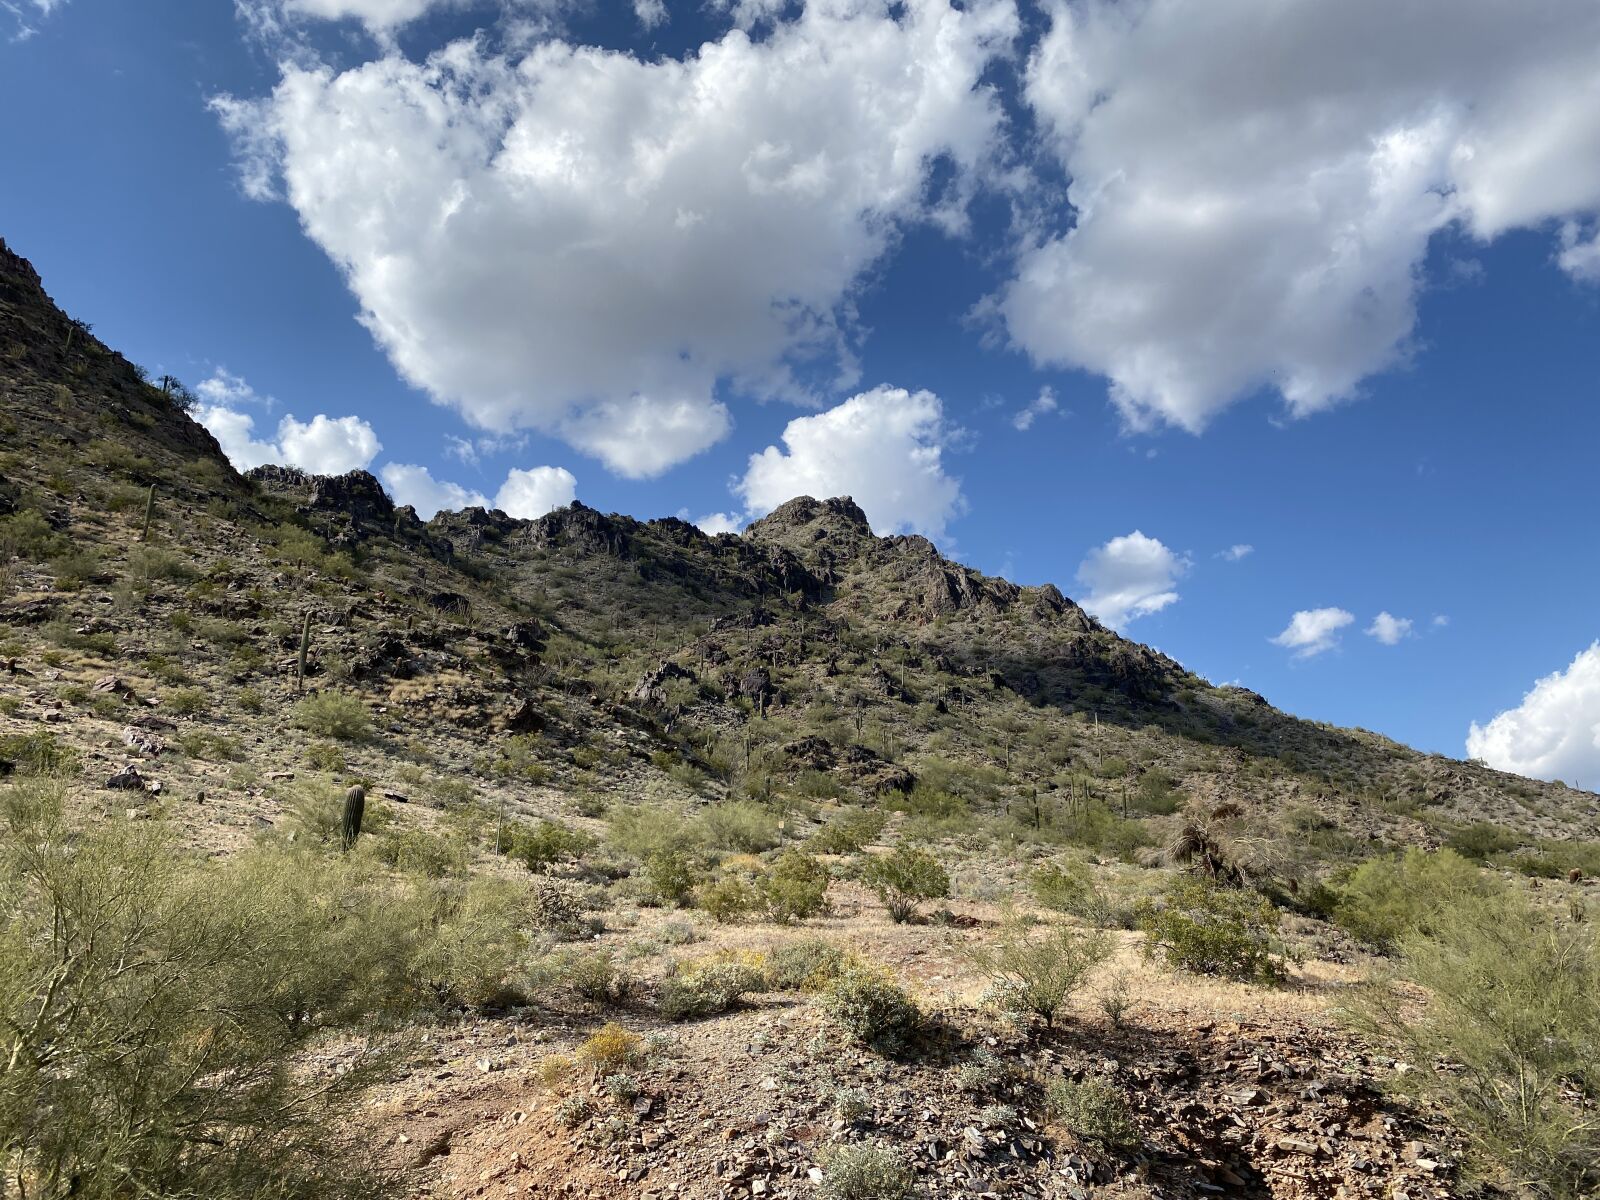 Apple iPhone 11 Pro Max + iPhone 11 Pro Max back triple camera 4.25mm f/1.8 sample photo. Desert, mountain, hills photography